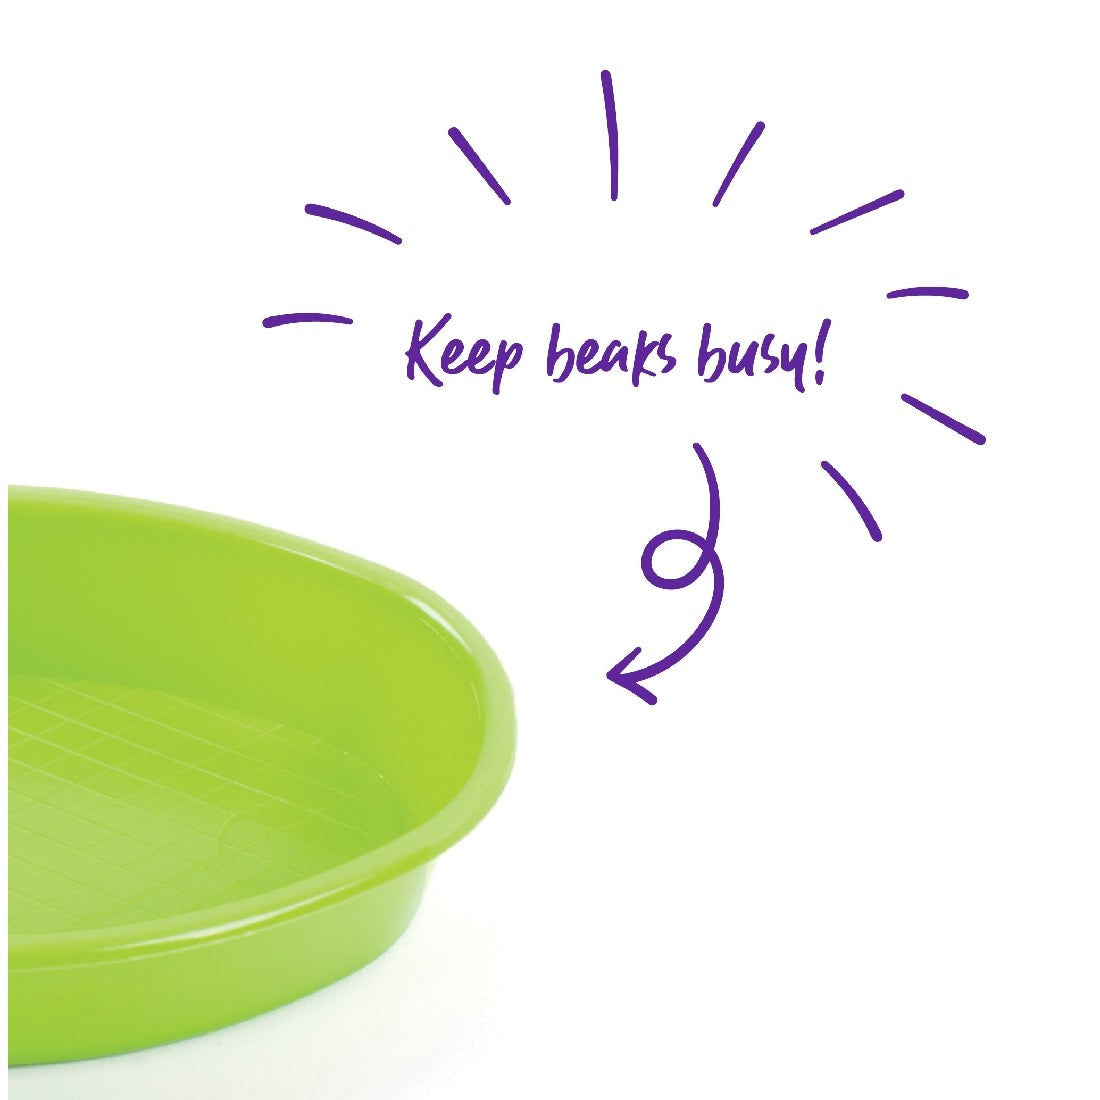 Green bird toy with "Keep beaks busy!" text, purple line drawing.